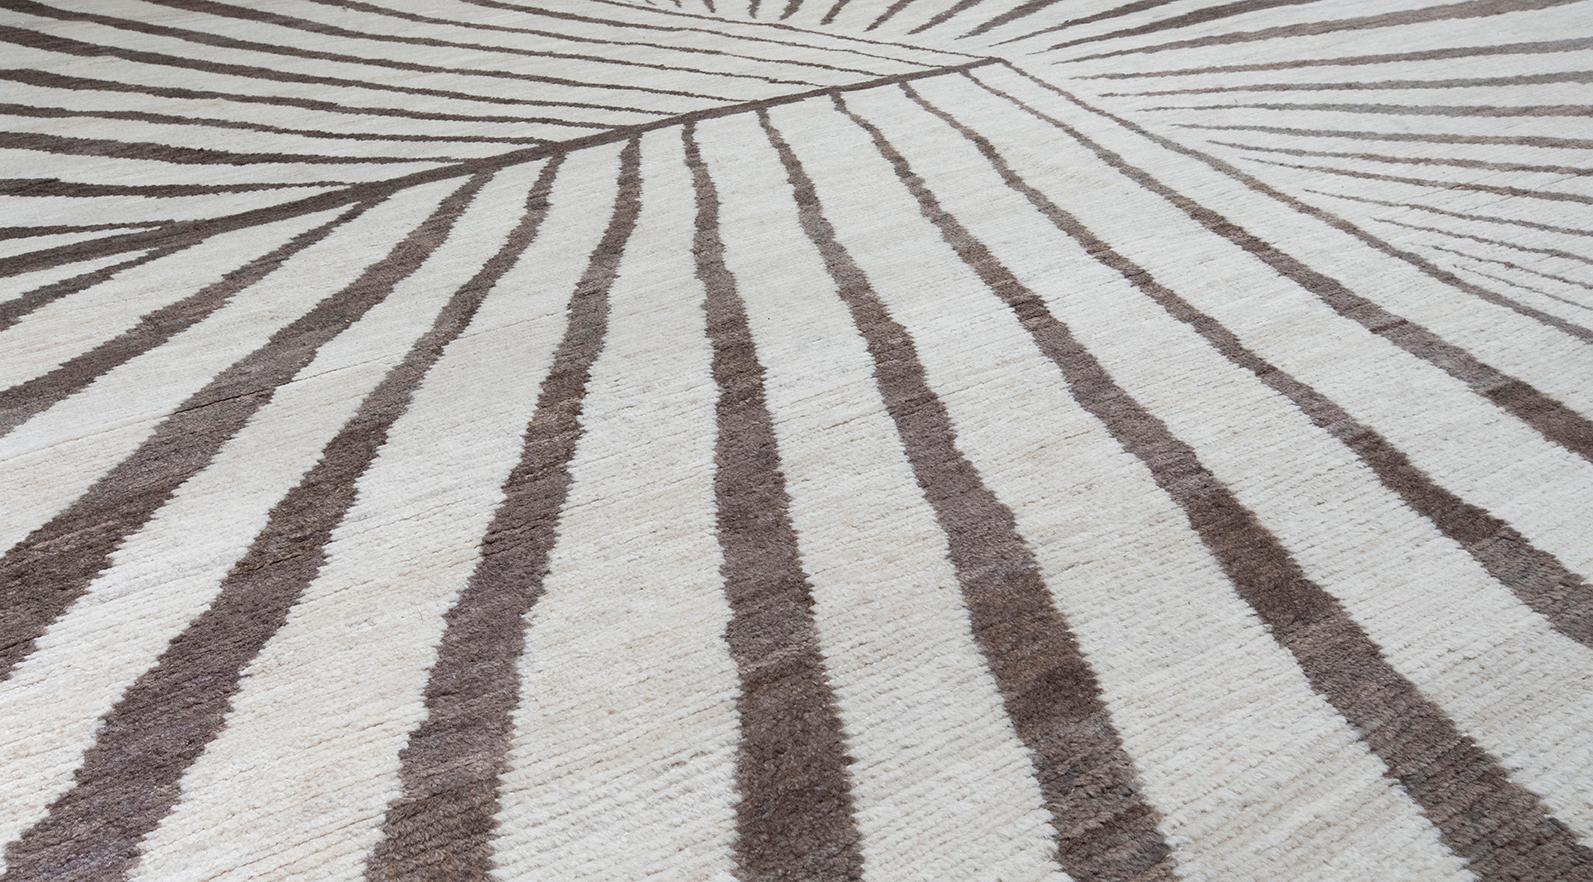 Our 'Astor' rug is handknotted in Afghanistan using natural dyes and handcarded wool. This rug has both a modern and tribal feel to it making it versatile for any aesthetic. It features an abstract geometric, starburst design in neutral tones.